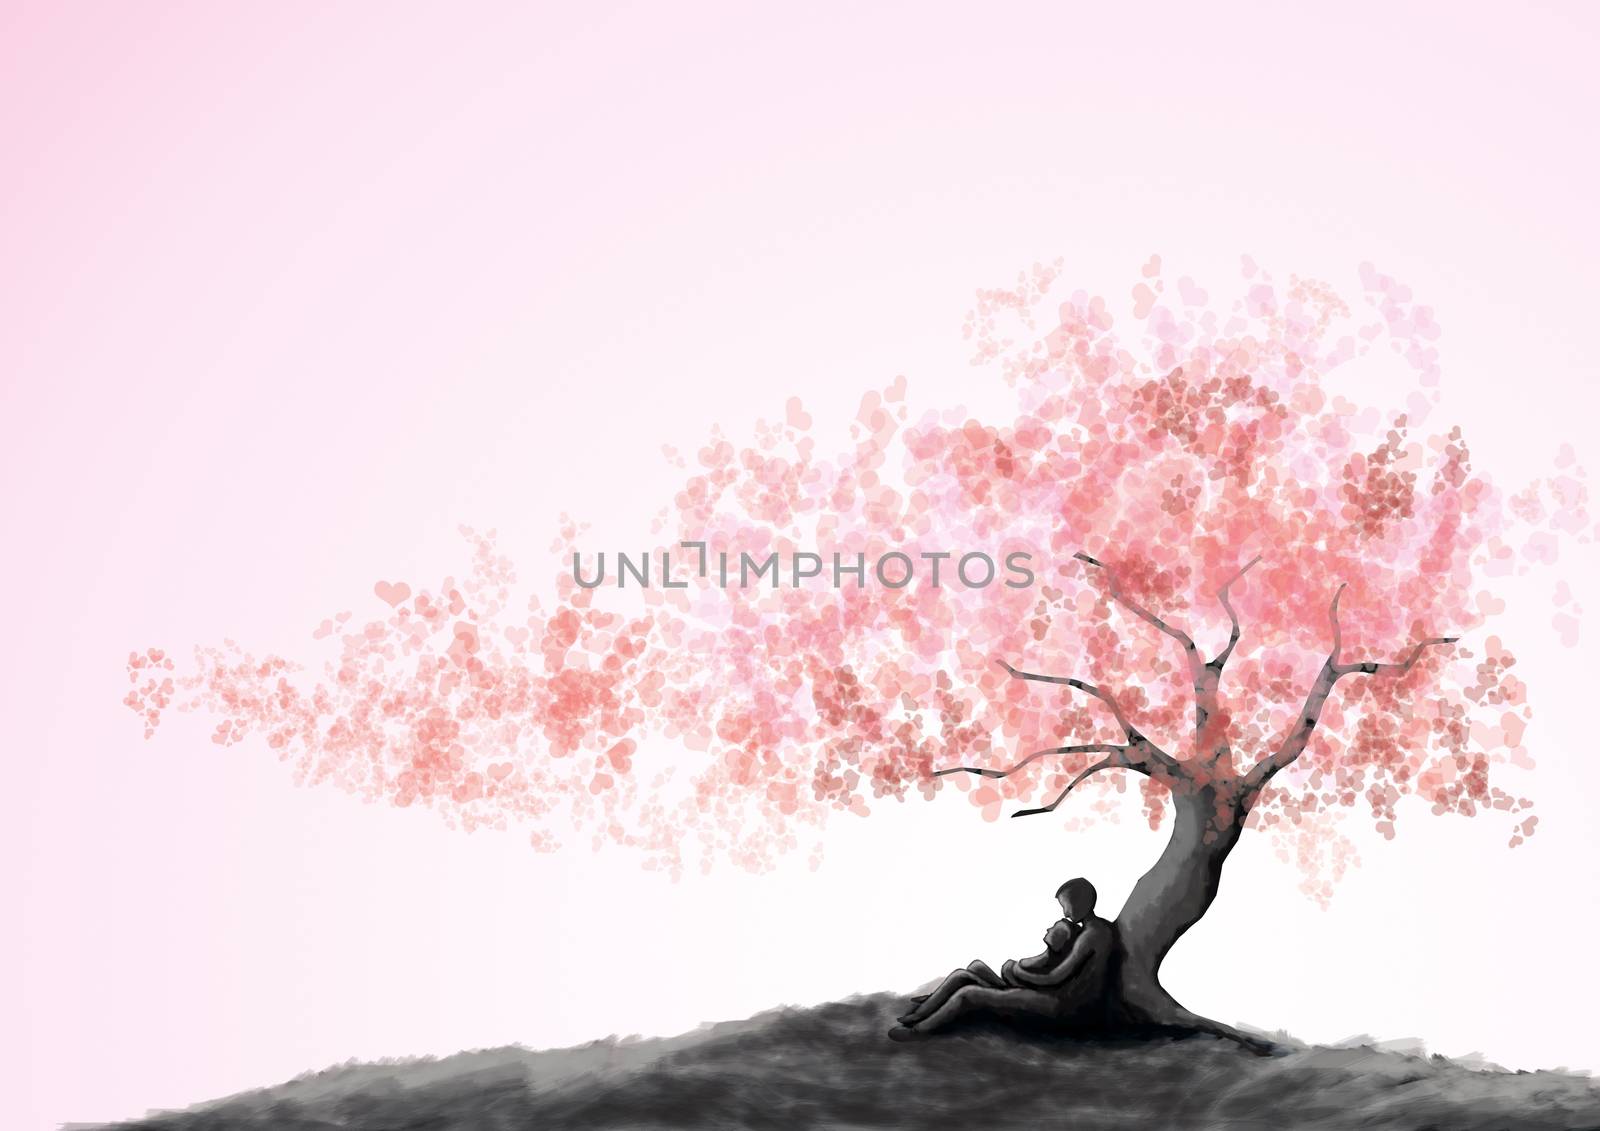 Dating couple under a love tree, painting style.